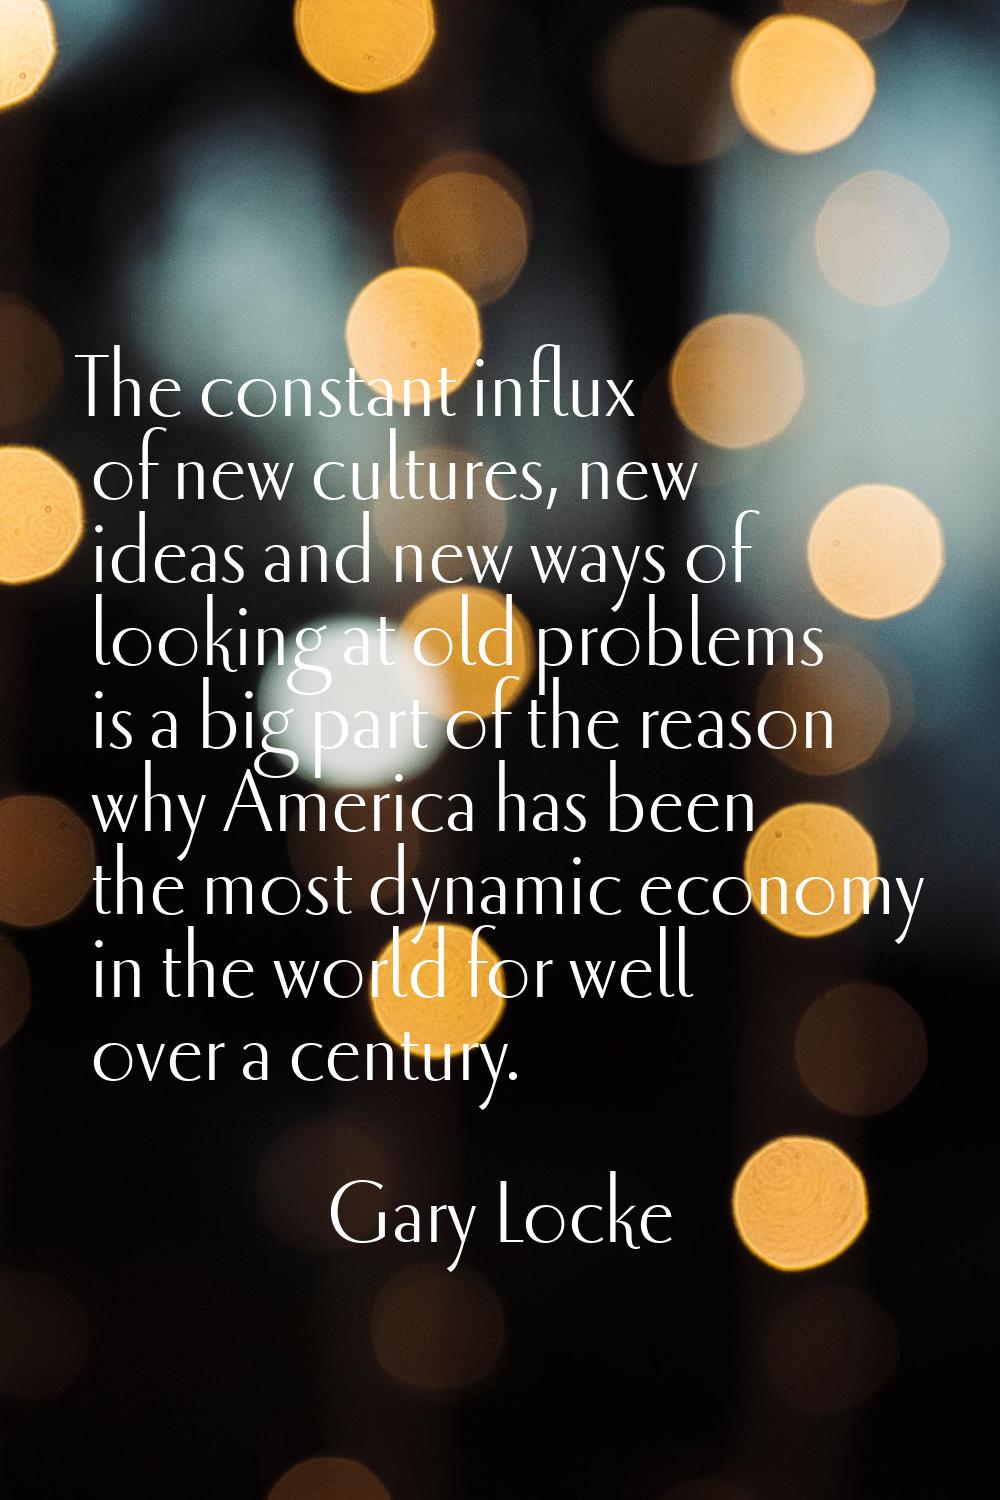 The constant influx of new cultures, new ideas and new ways of looking at old problems is a big par